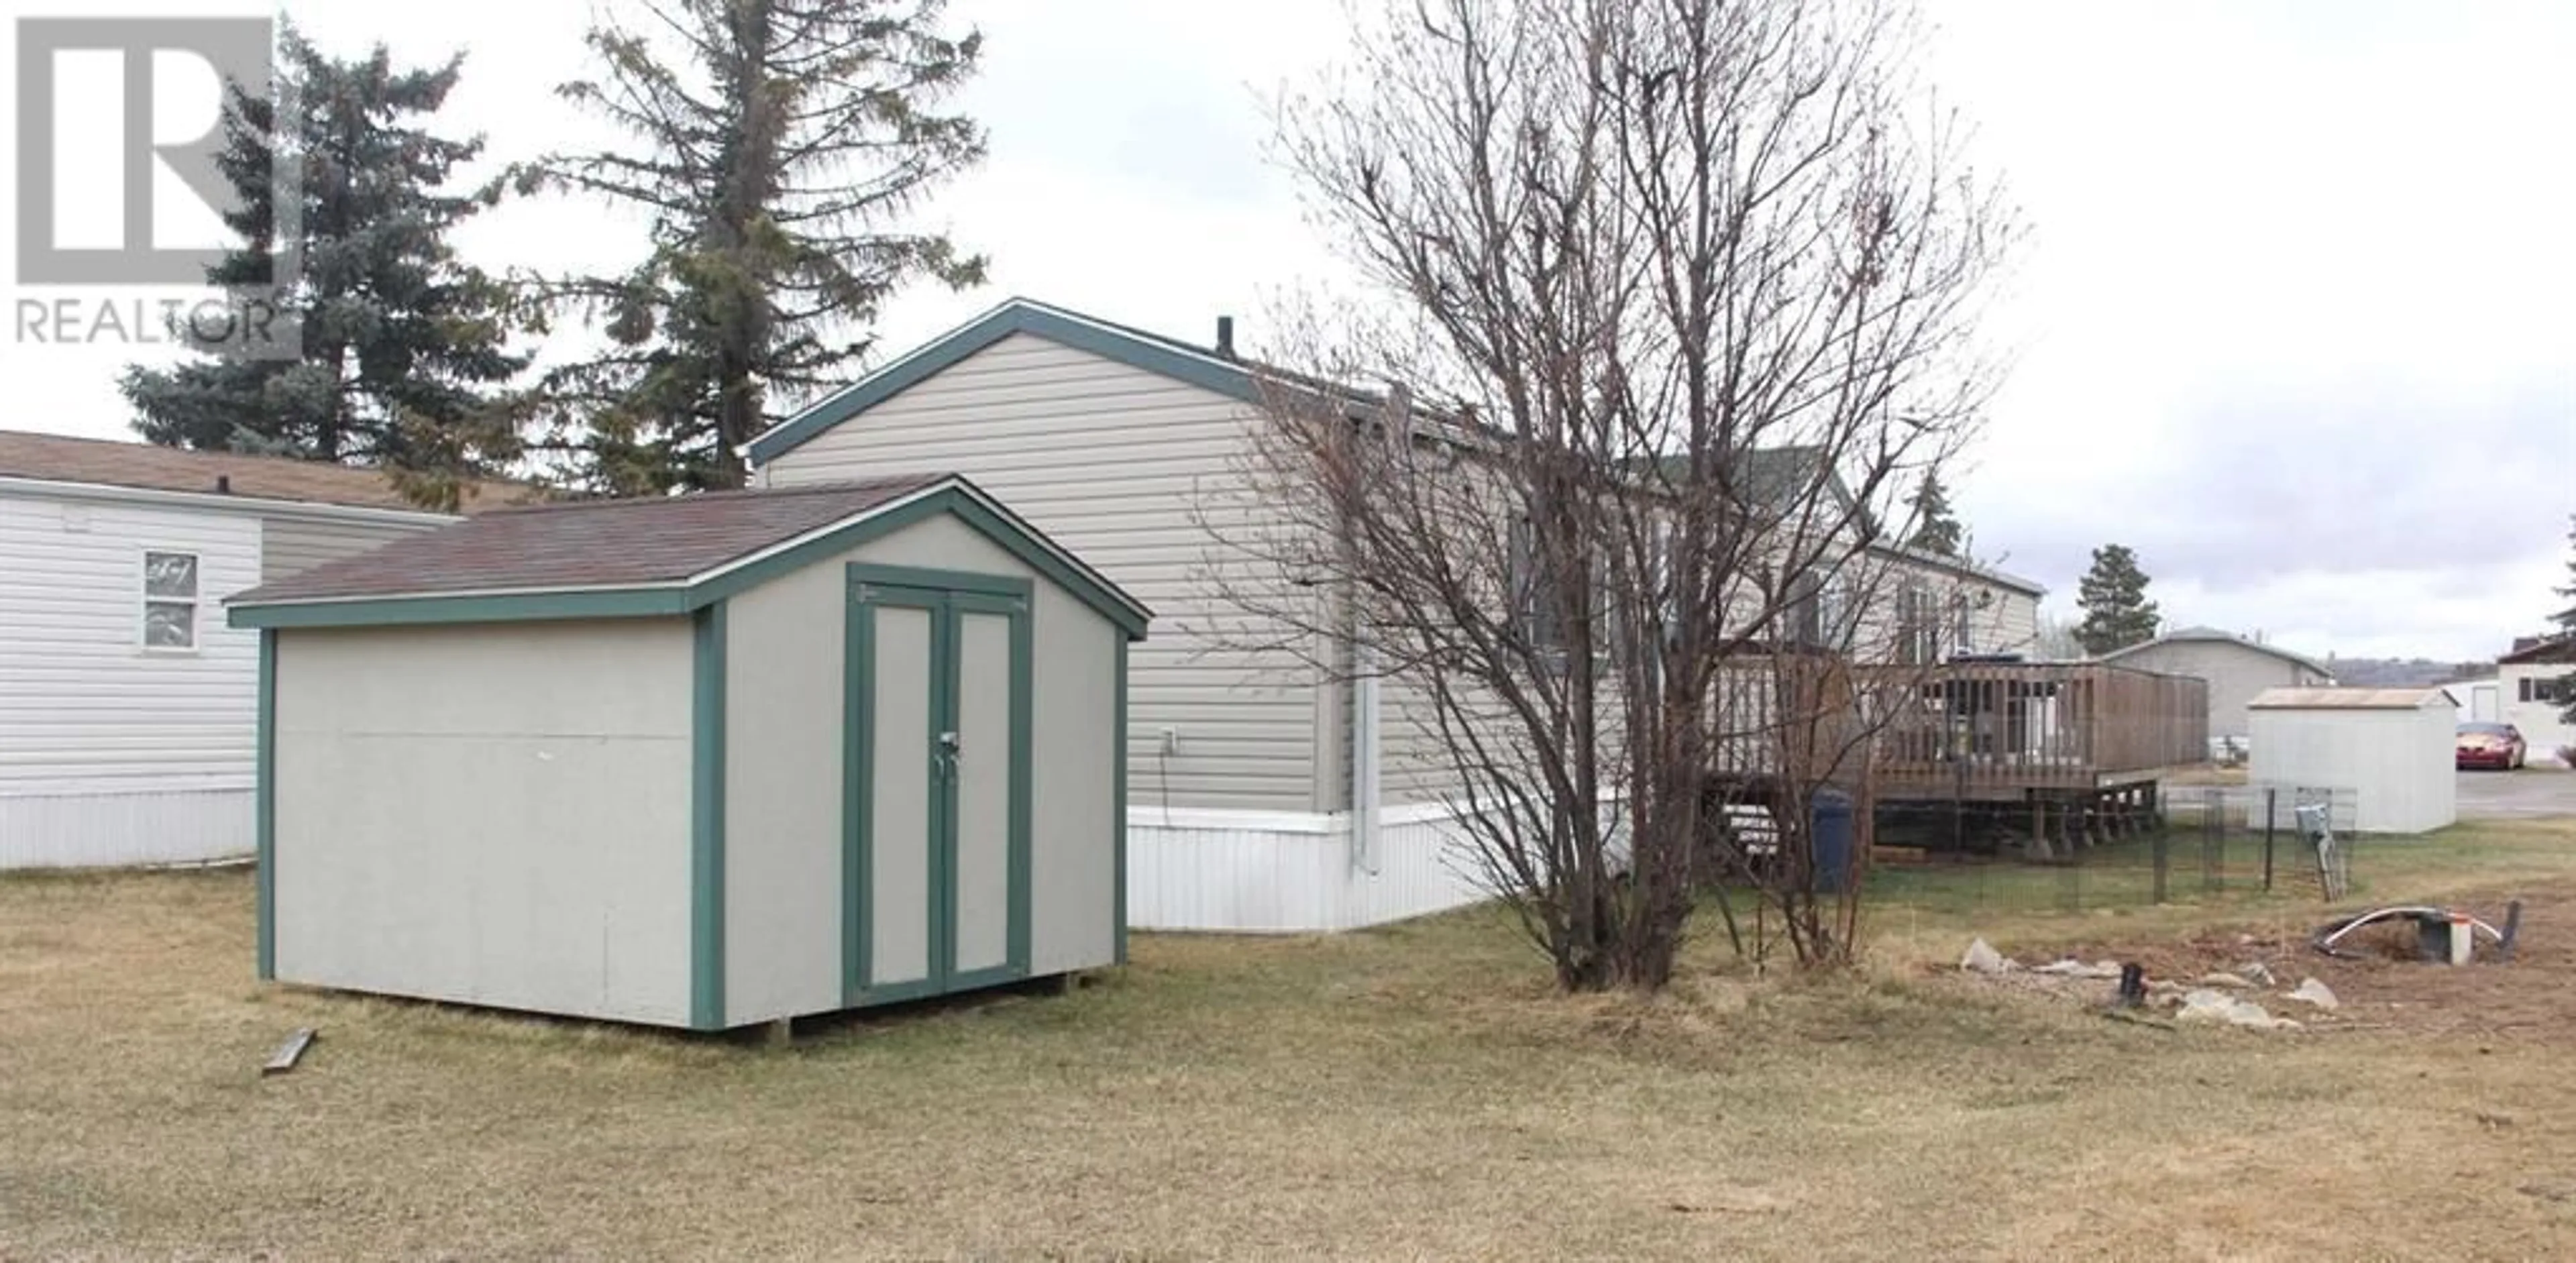 Shed for 7929 97 Avenue, Peace River Alberta T8S1W5